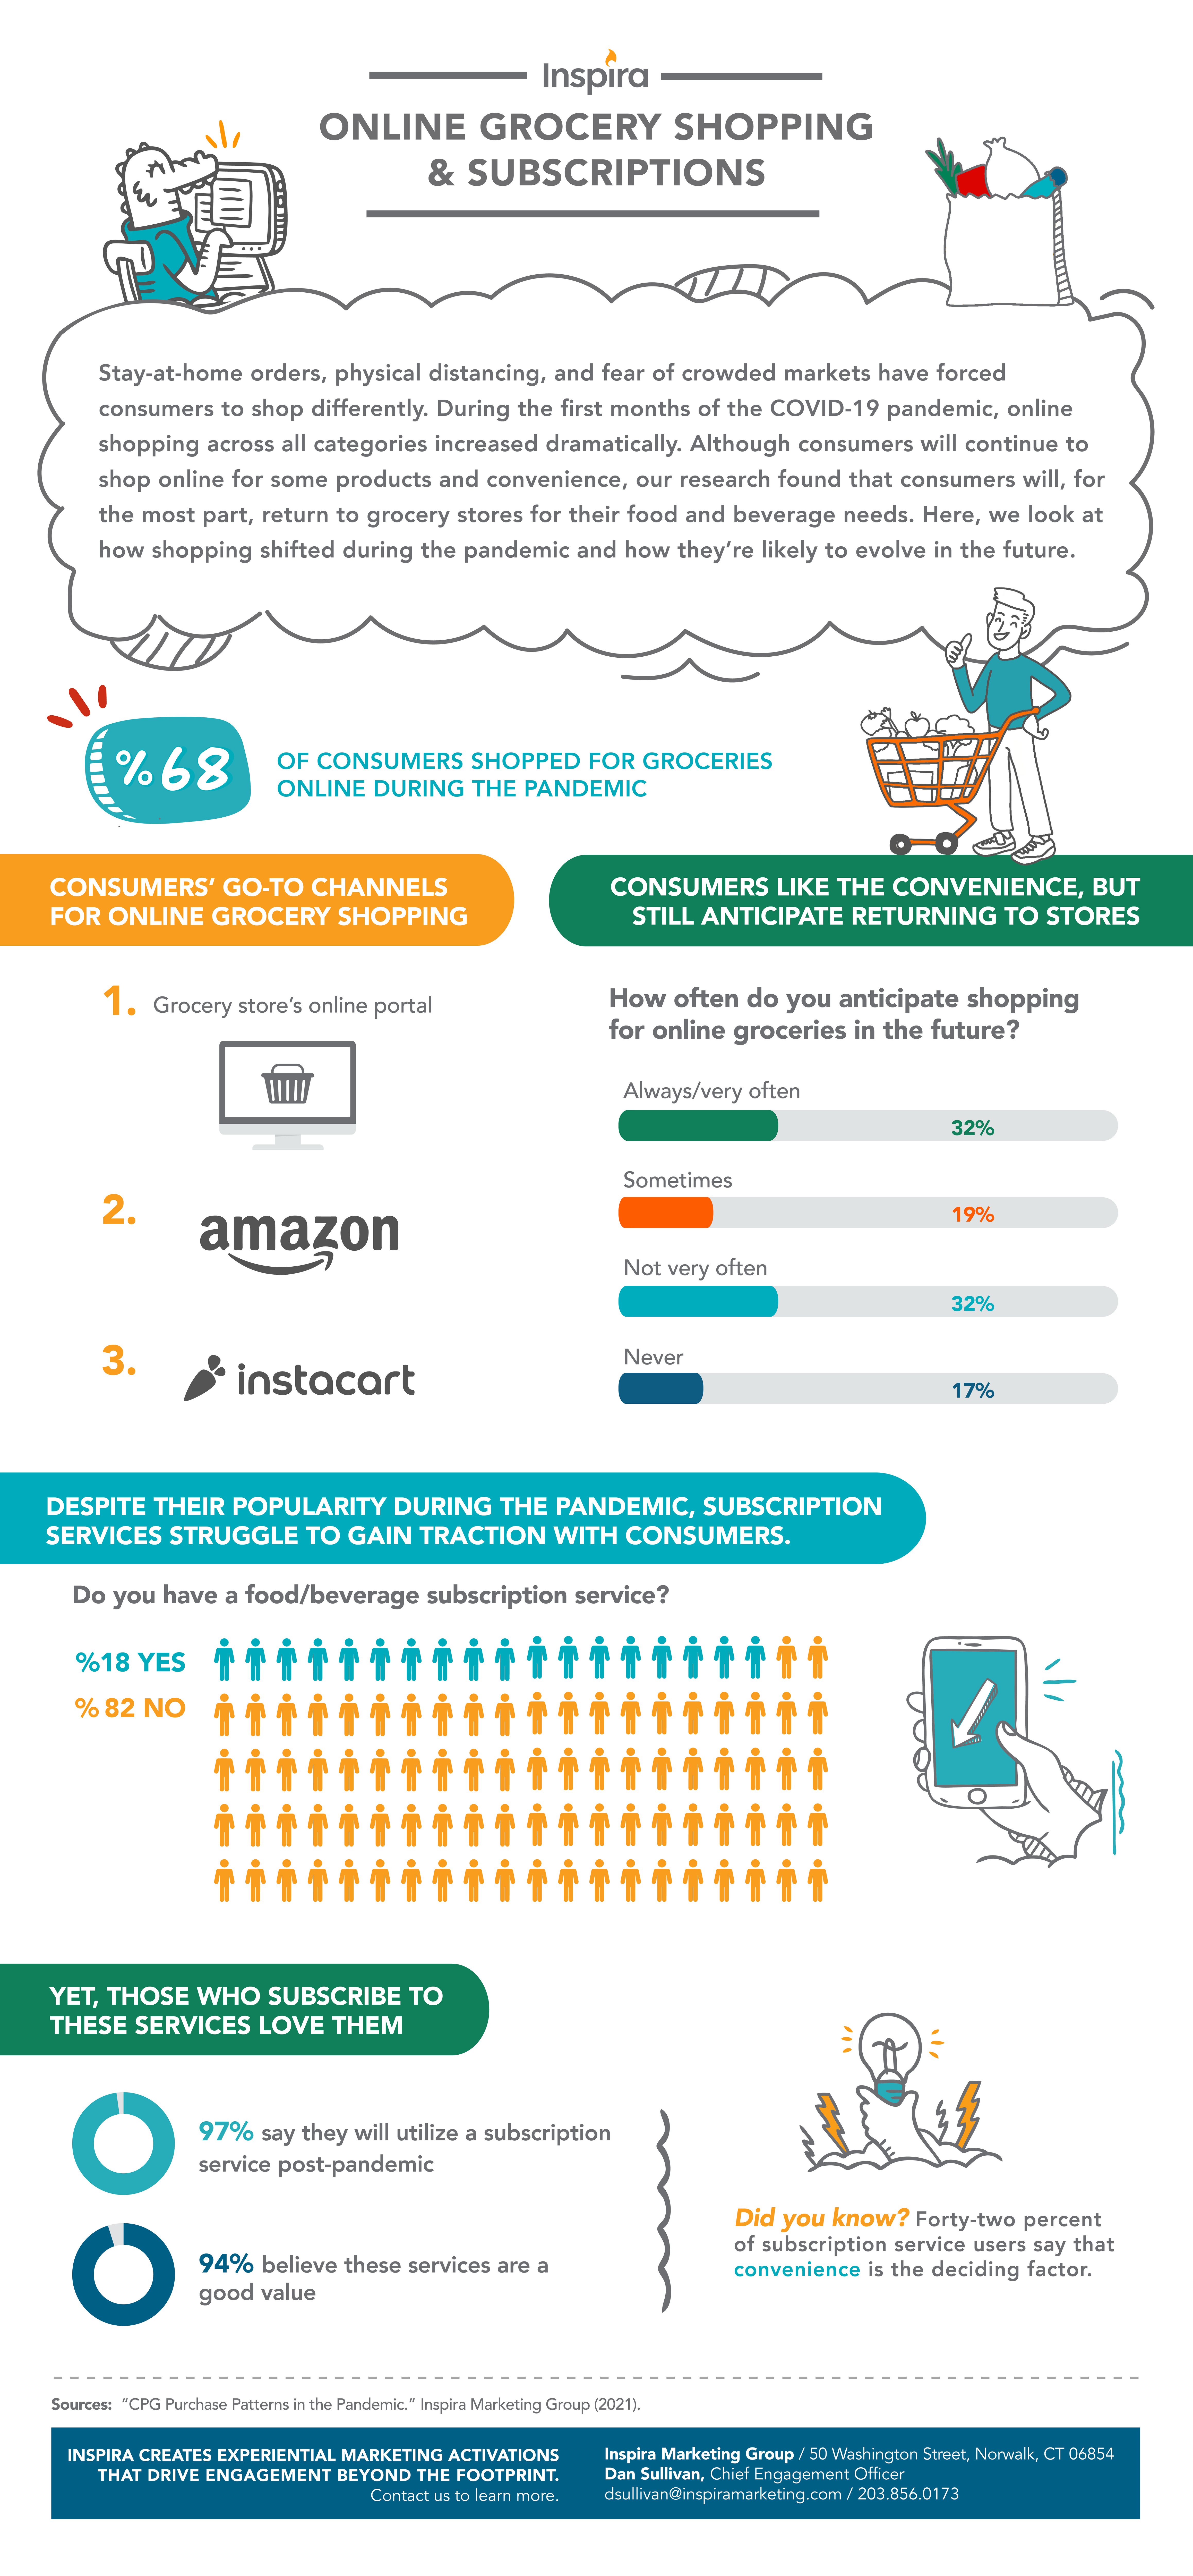 OnlineGroceryShopping&Subscriptions_2021_Infographic